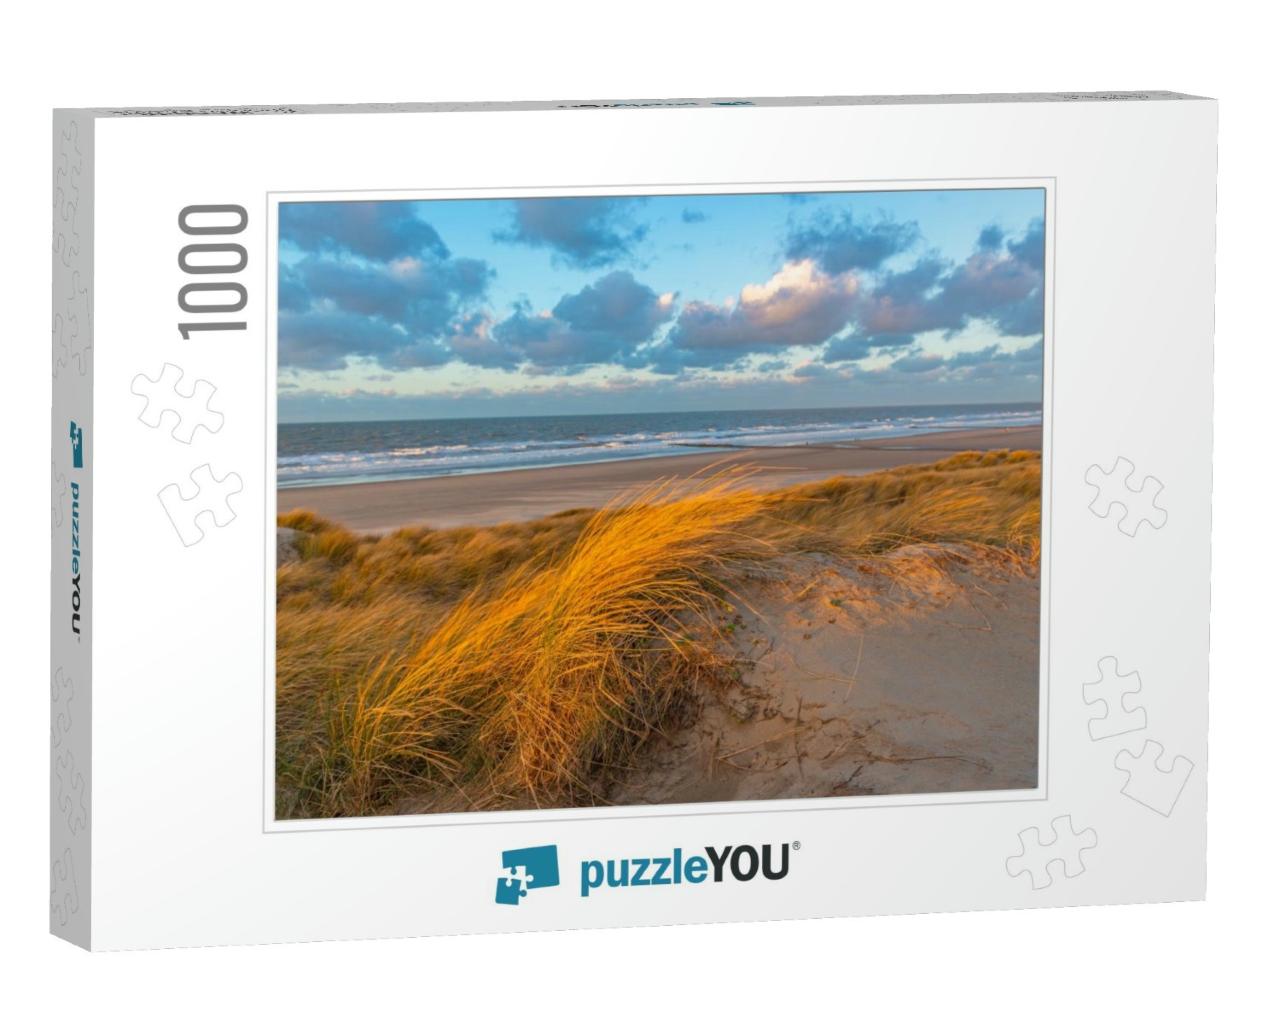 The Wind Blowing Through the Dune Grasses with Blur Motio... Jigsaw Puzzle with 1000 pieces